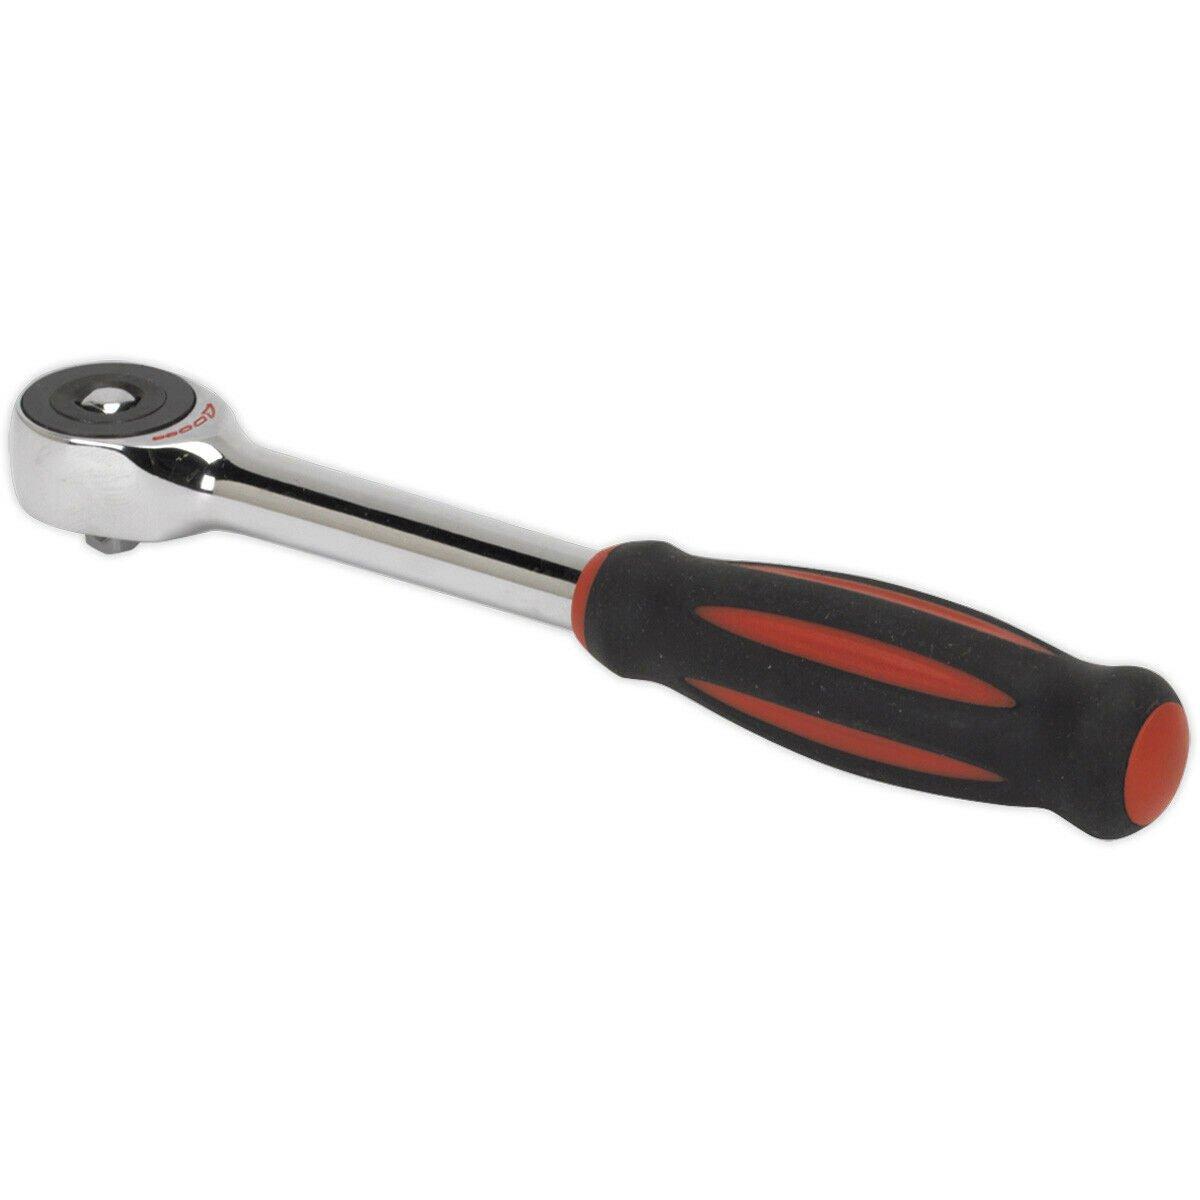 Ratchet Speed Wrench - 1/4 Inch Sq Drive - Dual Action Push-Through Reverse